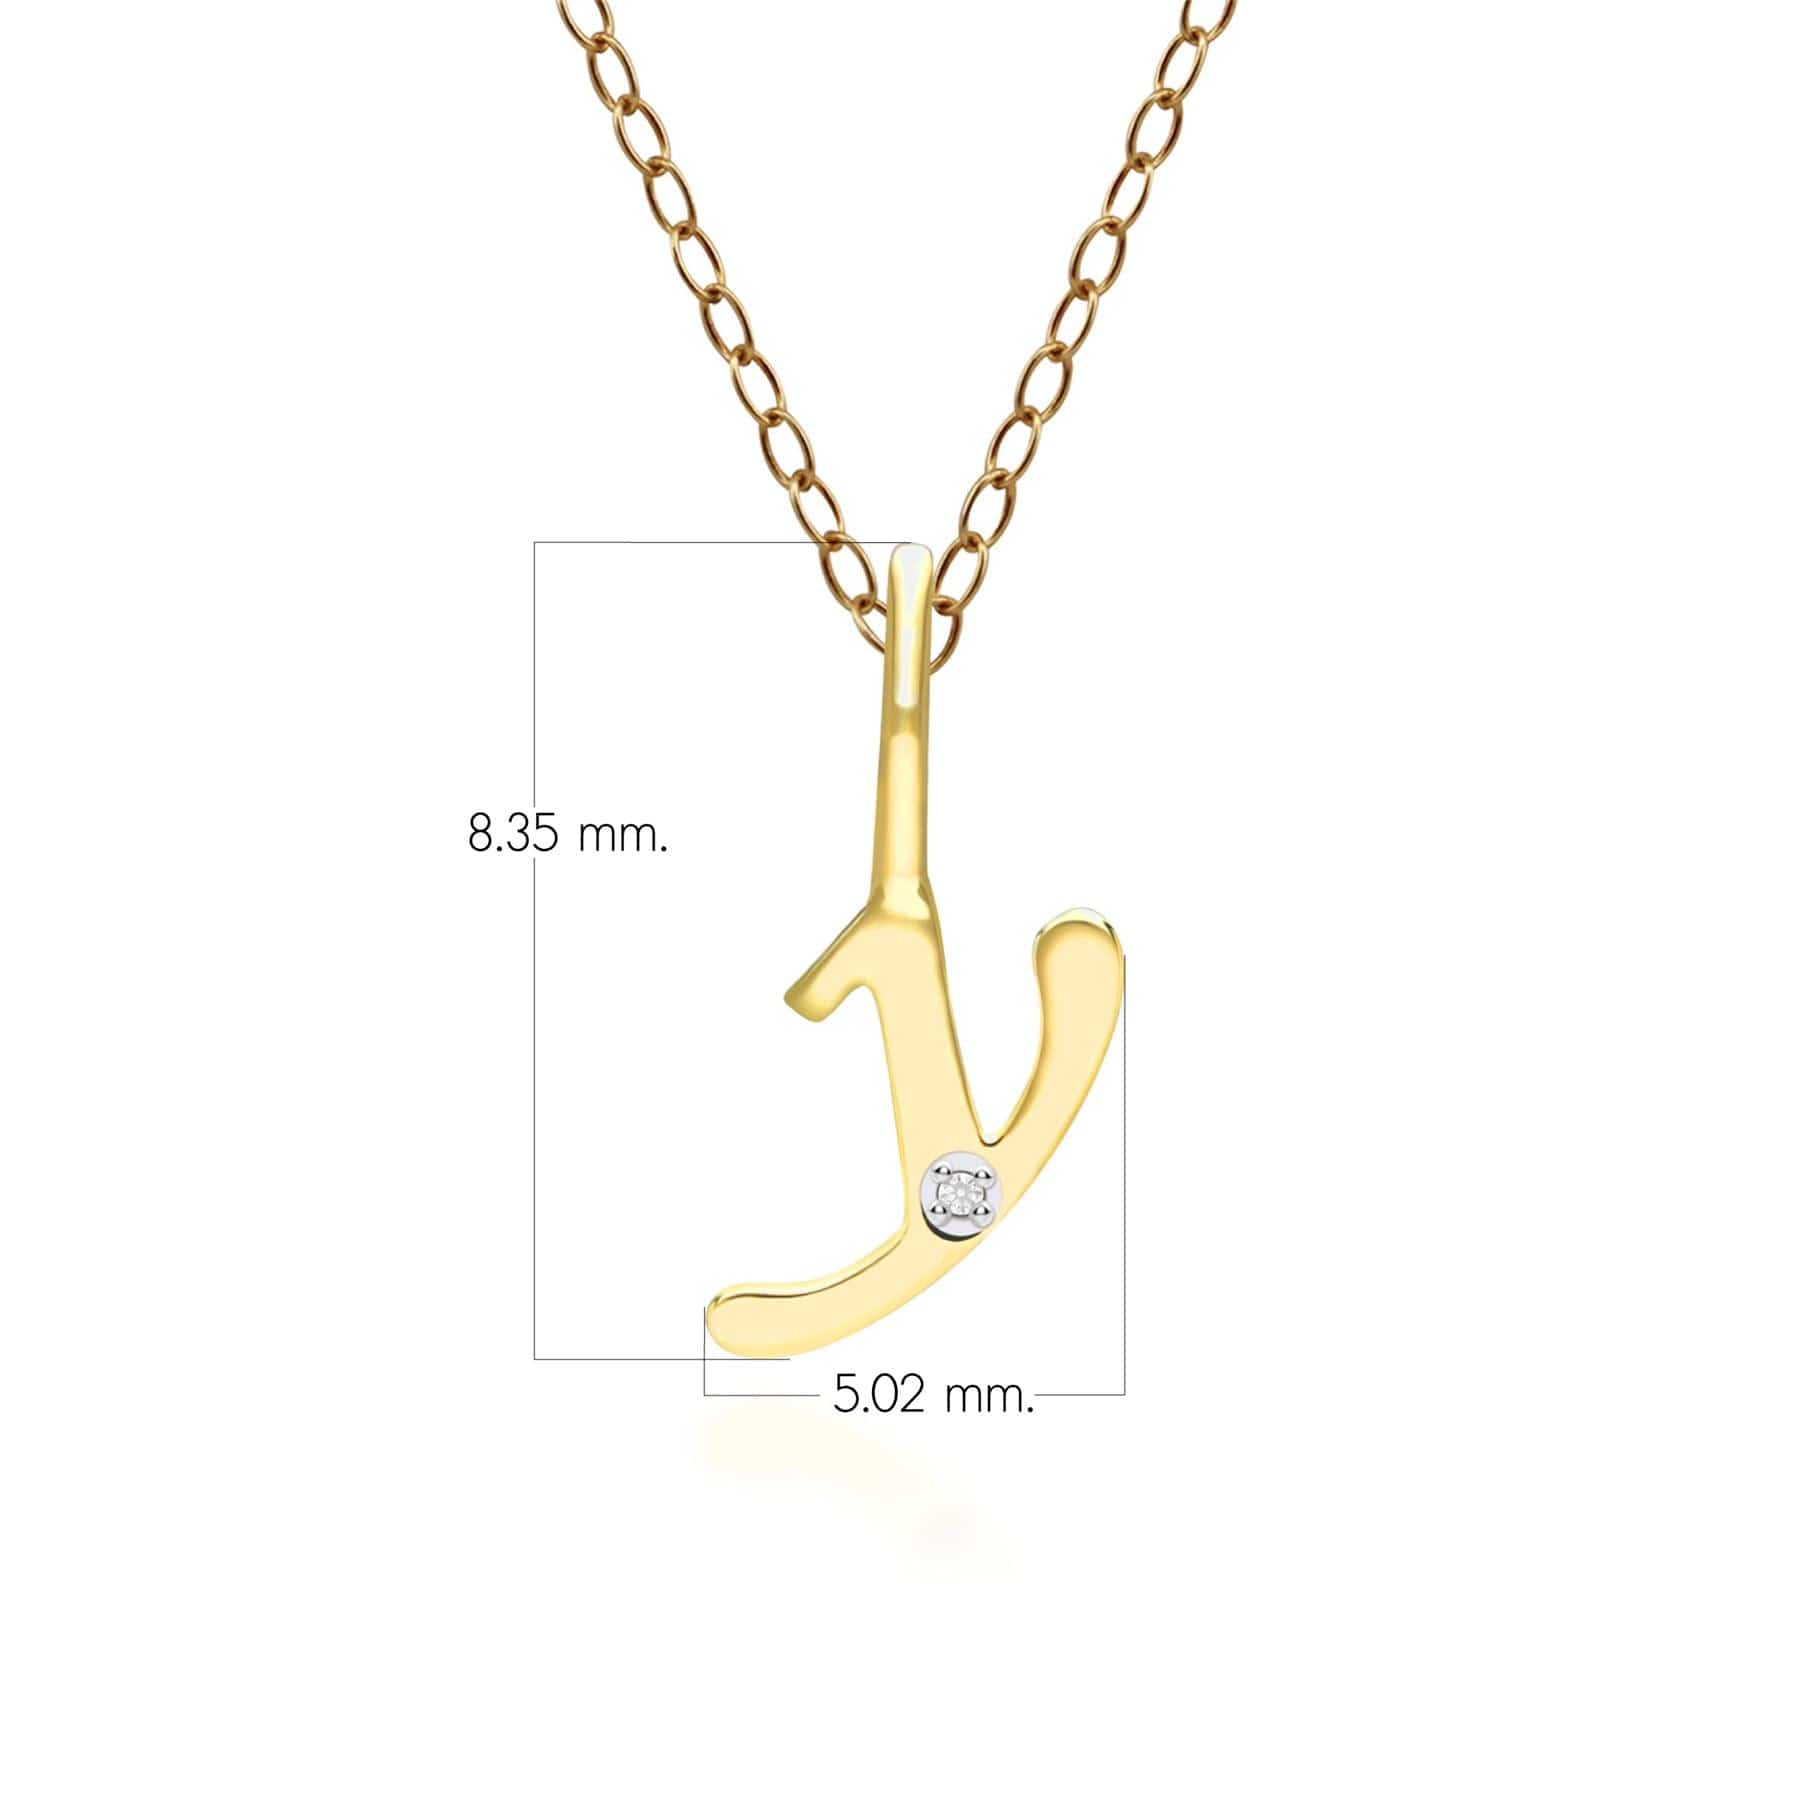 191P0795019 Alphabet Letter Y Diamond pendant in 9ct Yellow Gold Dimensions